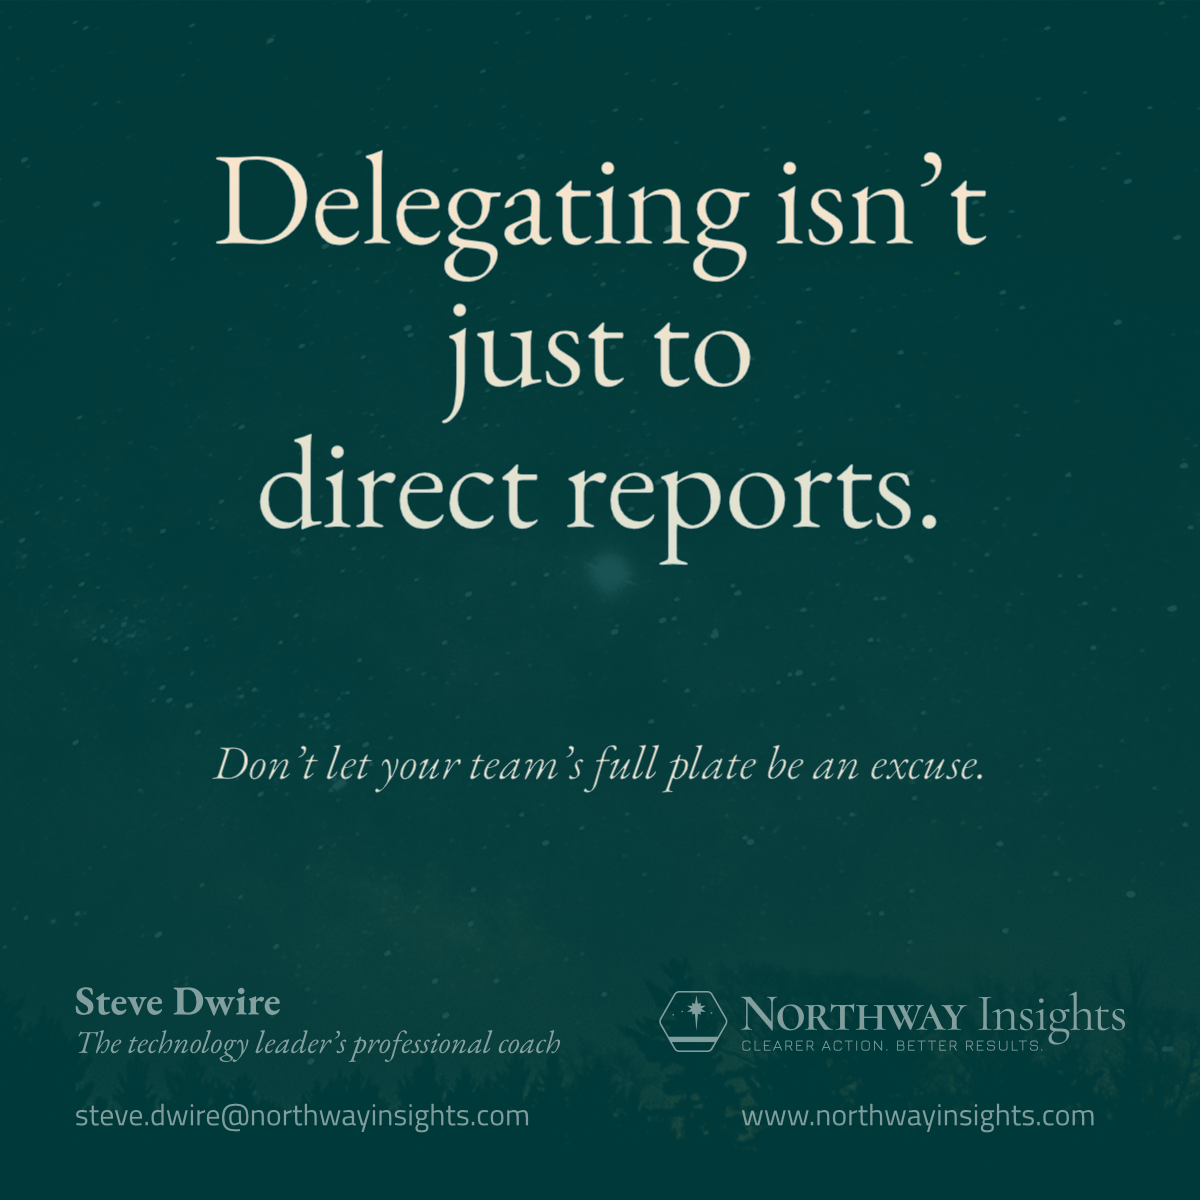 Delegating isn't just to direct reports. (Don't let your team's full plate be an excuse.)